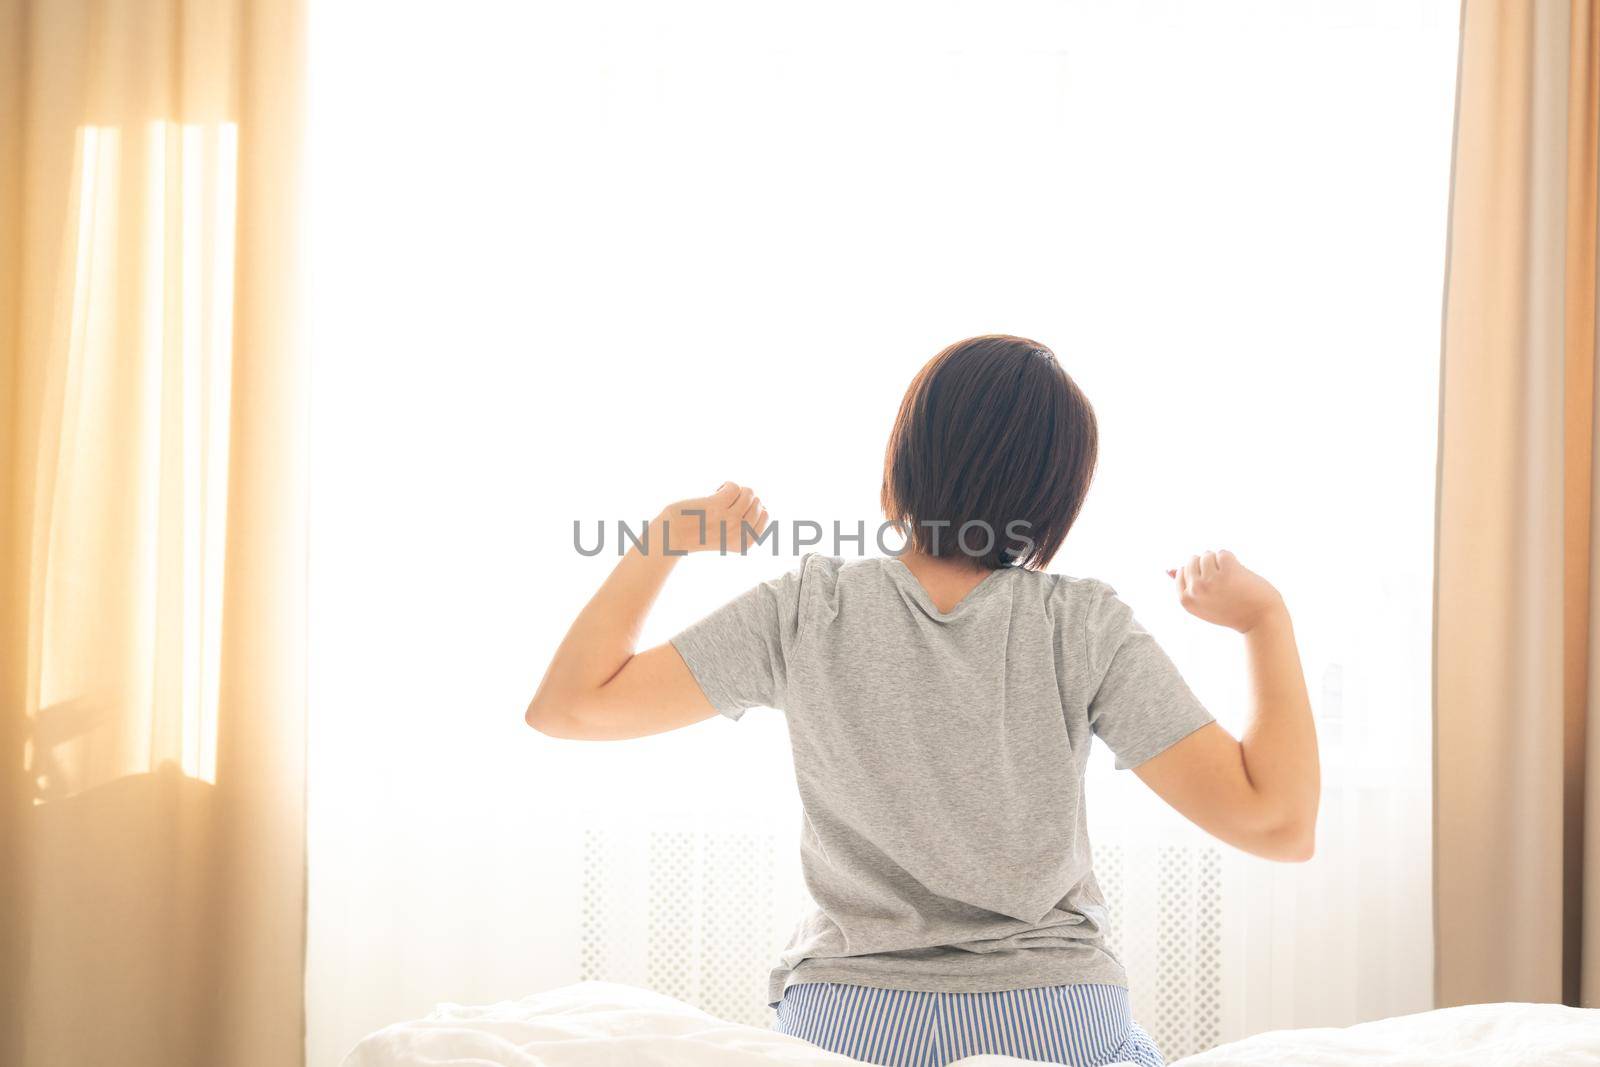 Woman stretching in bed after wake up in front of window, back view by Mariakray